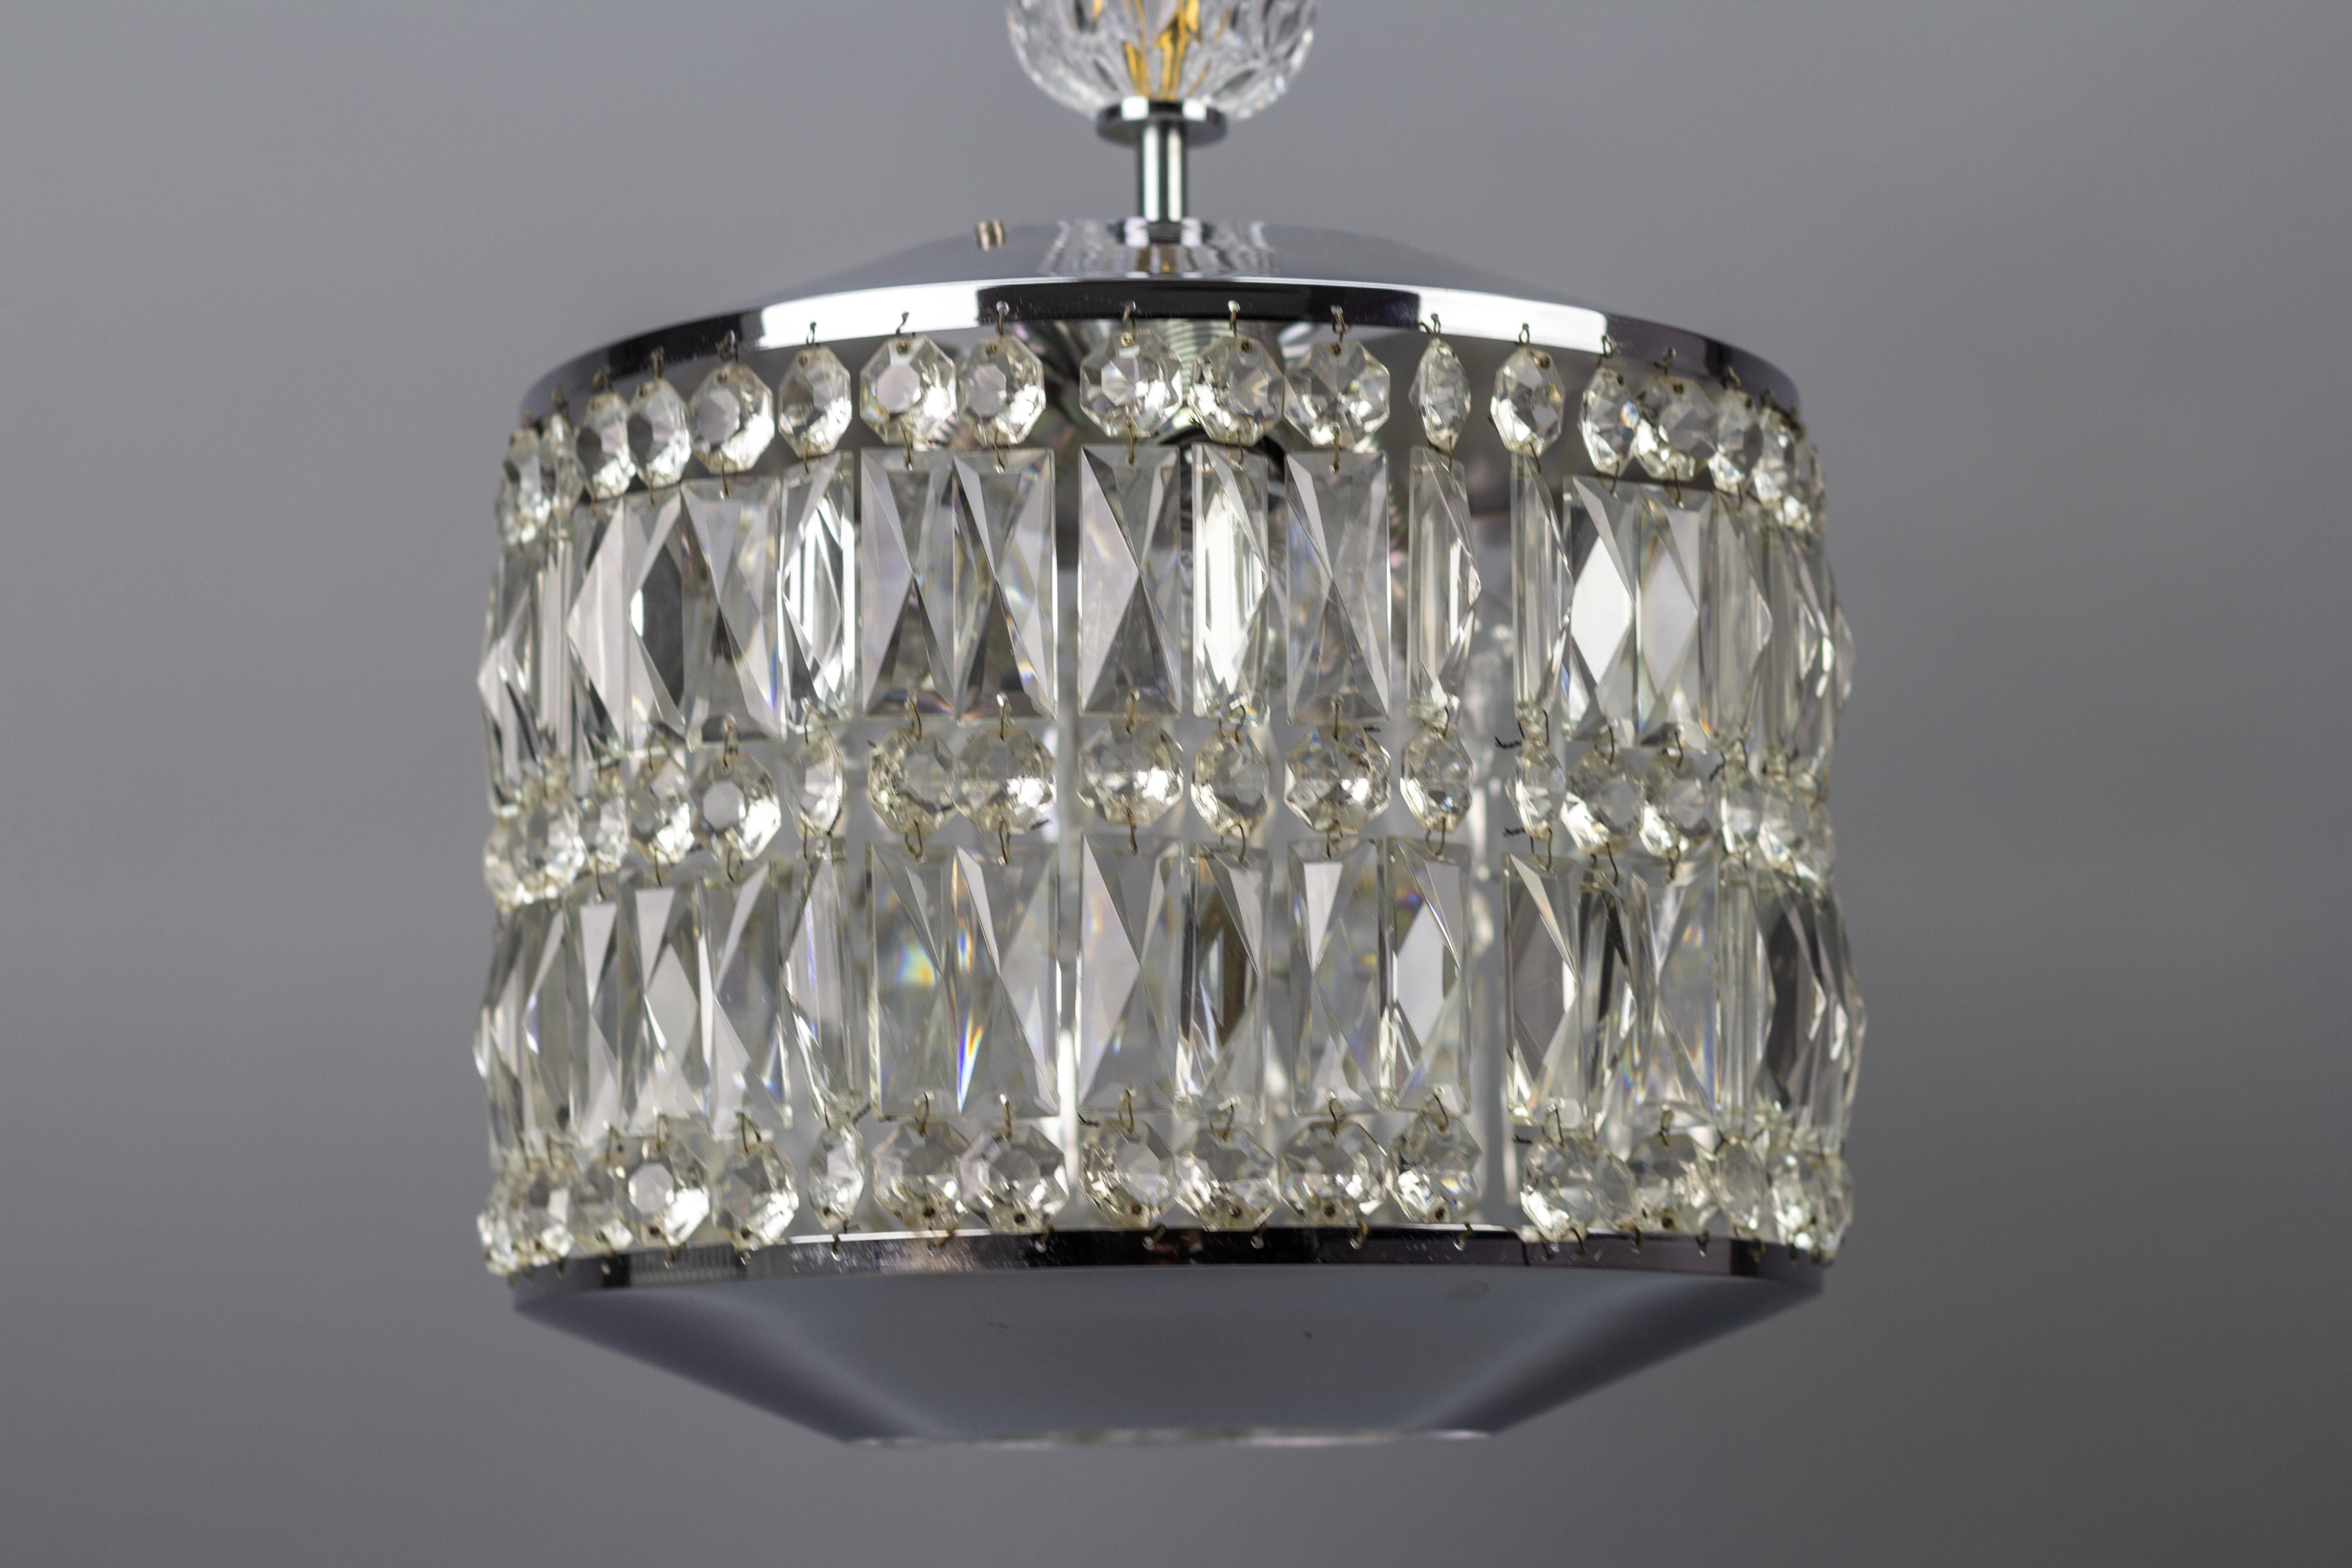 German Mid-Century Modern Crystal Glass and Chrome Chandelier or Pendant Light For Sale 1